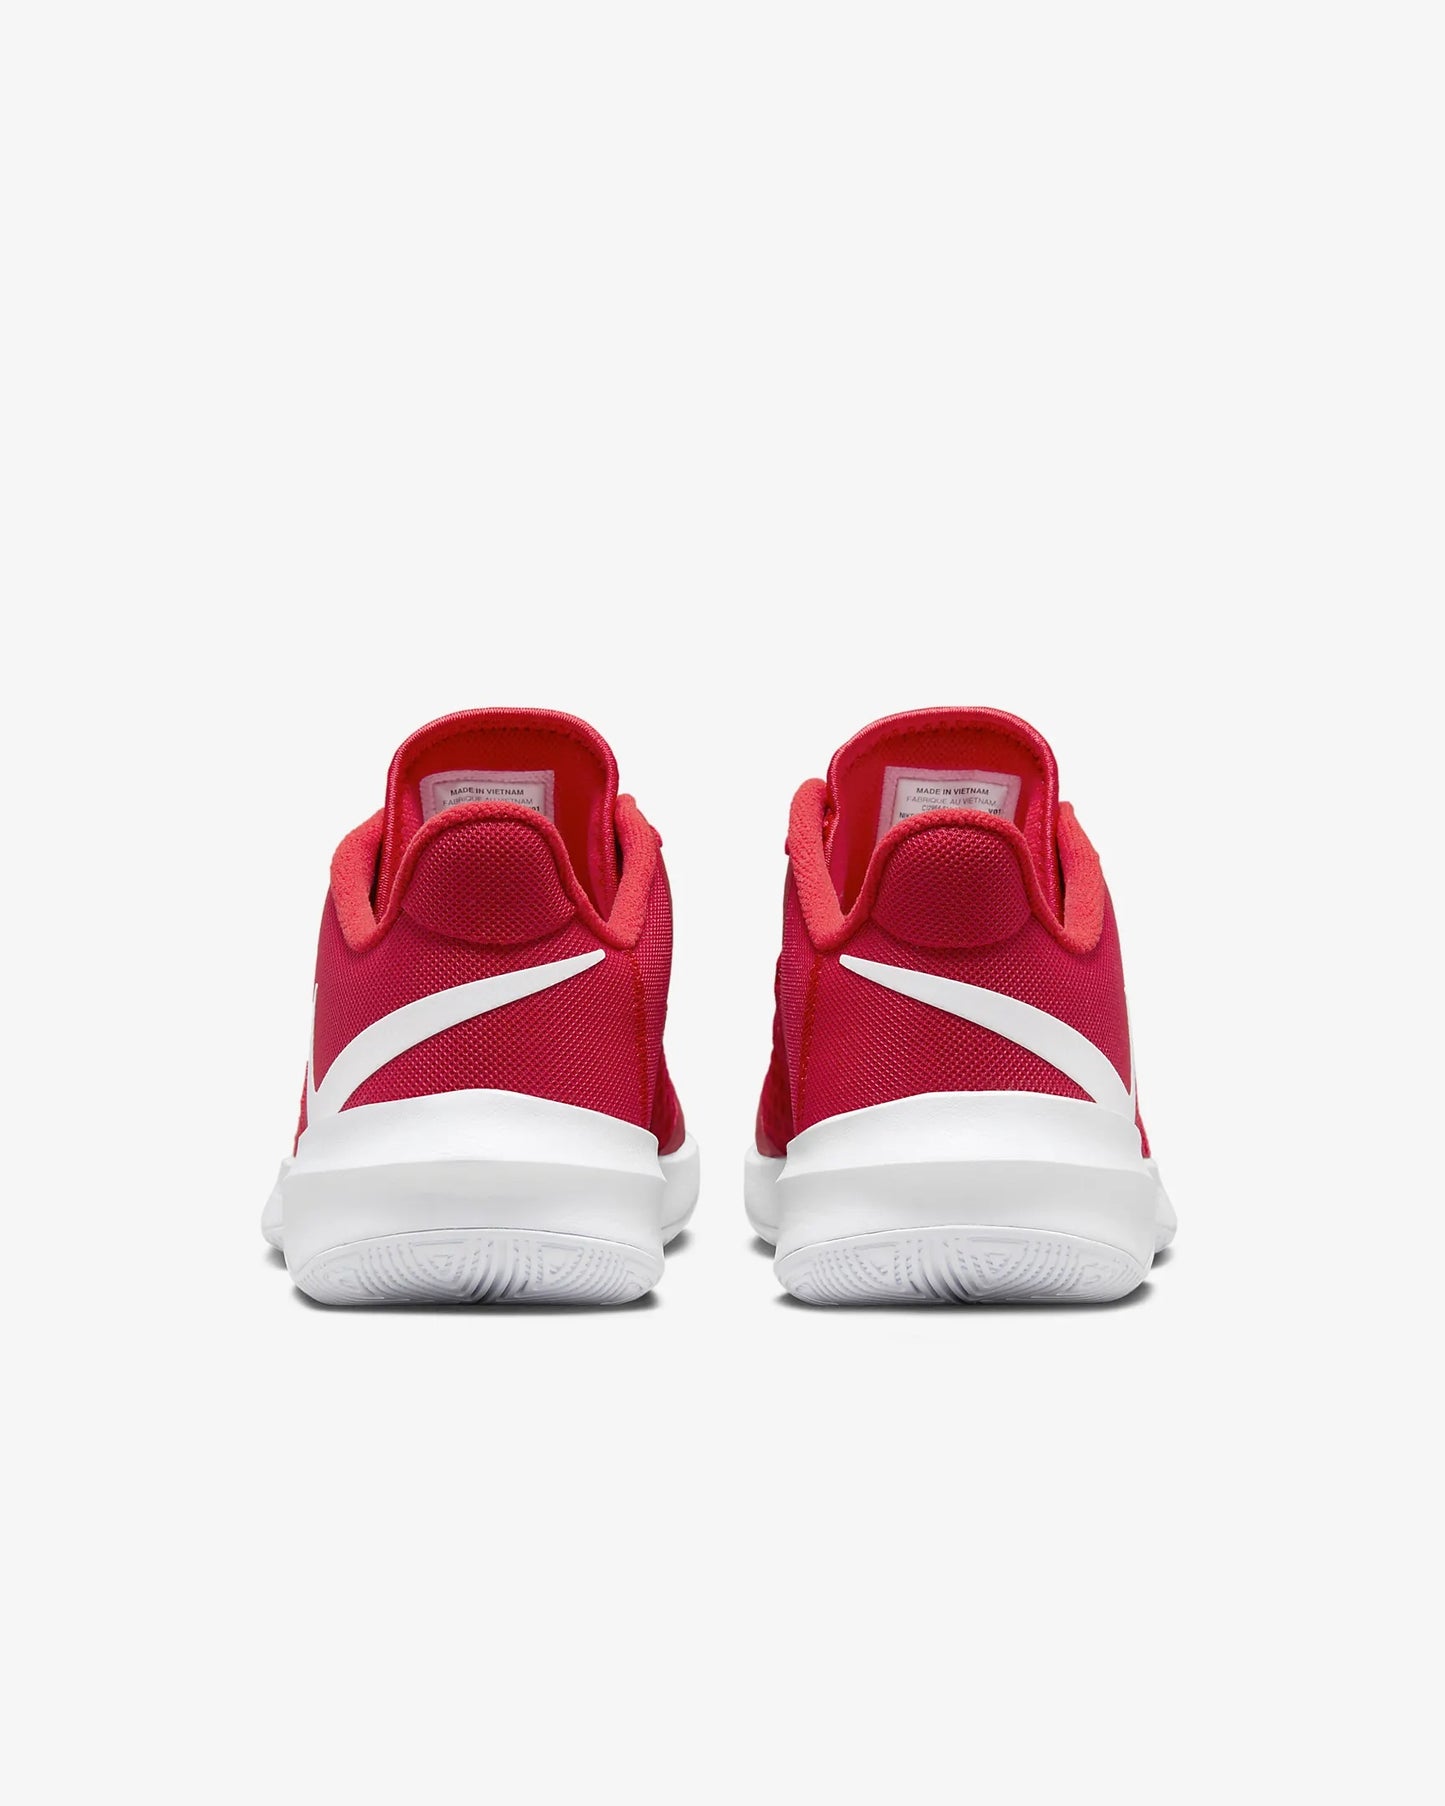 Nike Zoom Hyperspeed Court Shoes(Red)